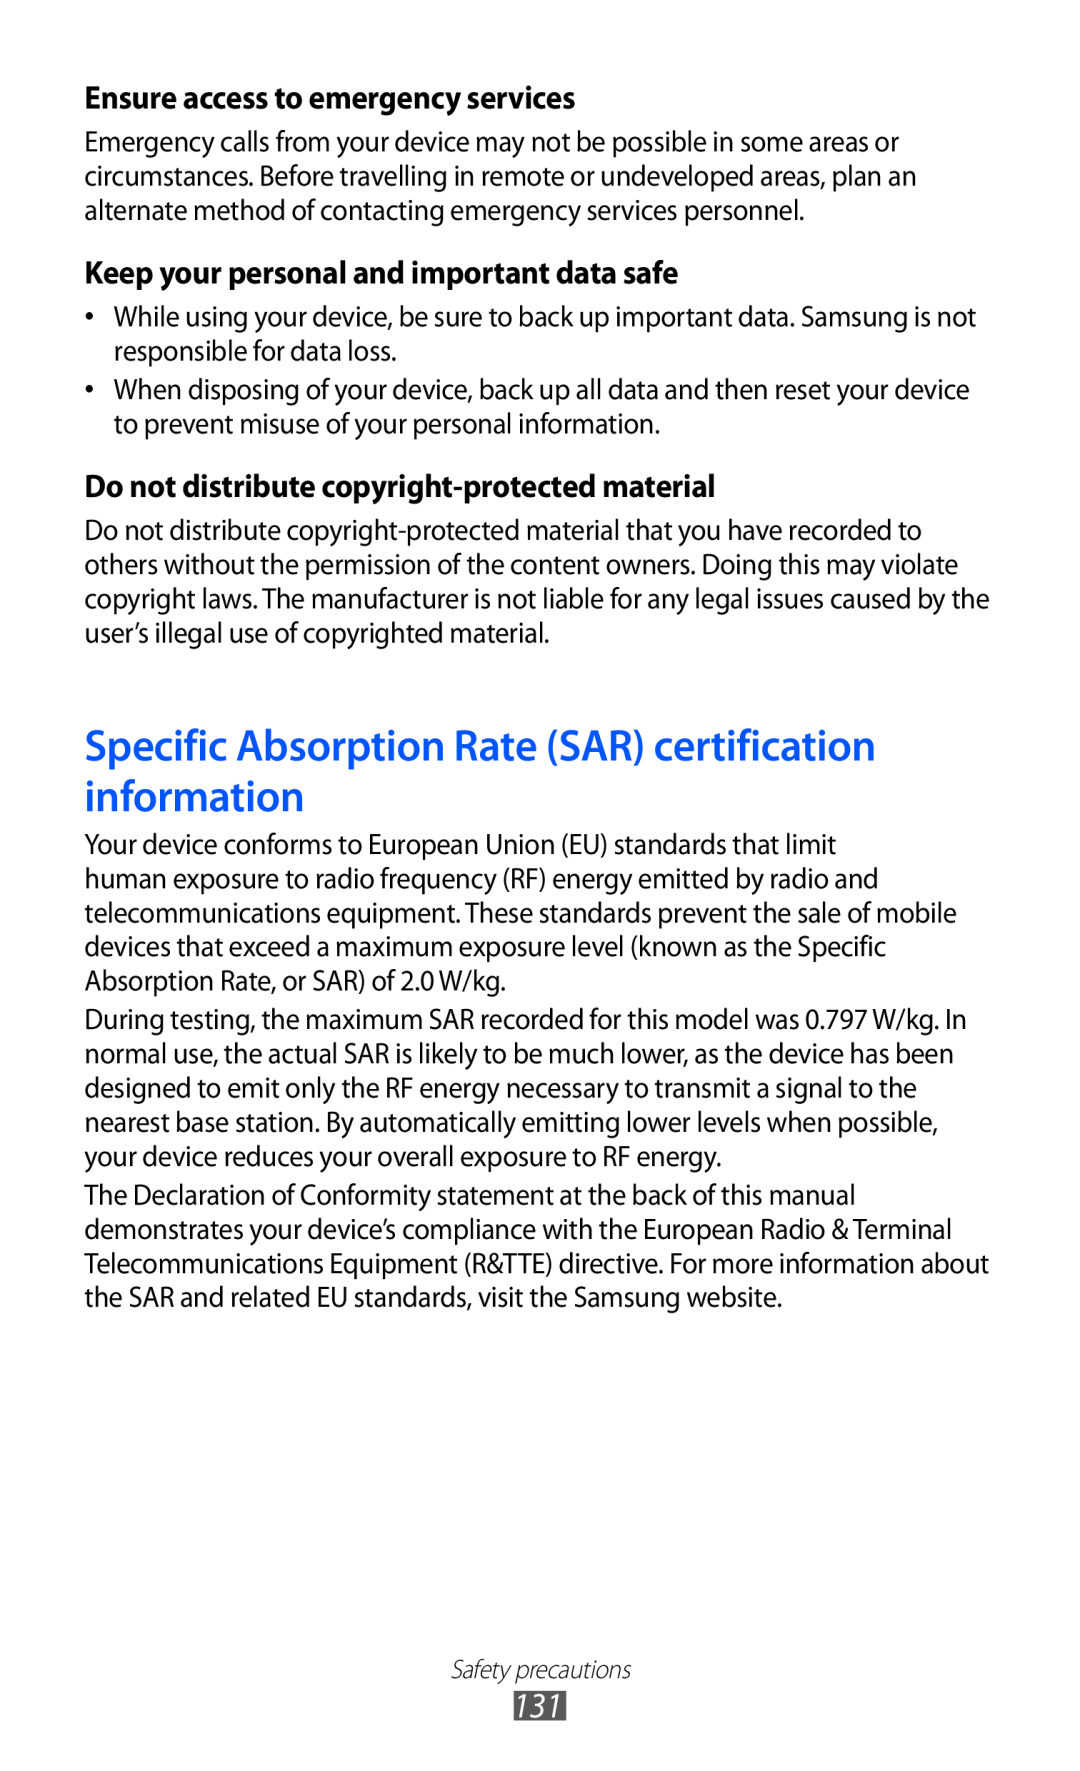 Samsung GT-S5380SSASFR manual Specific Absorption Rate SAR certification information, Ensure access to emergency services 